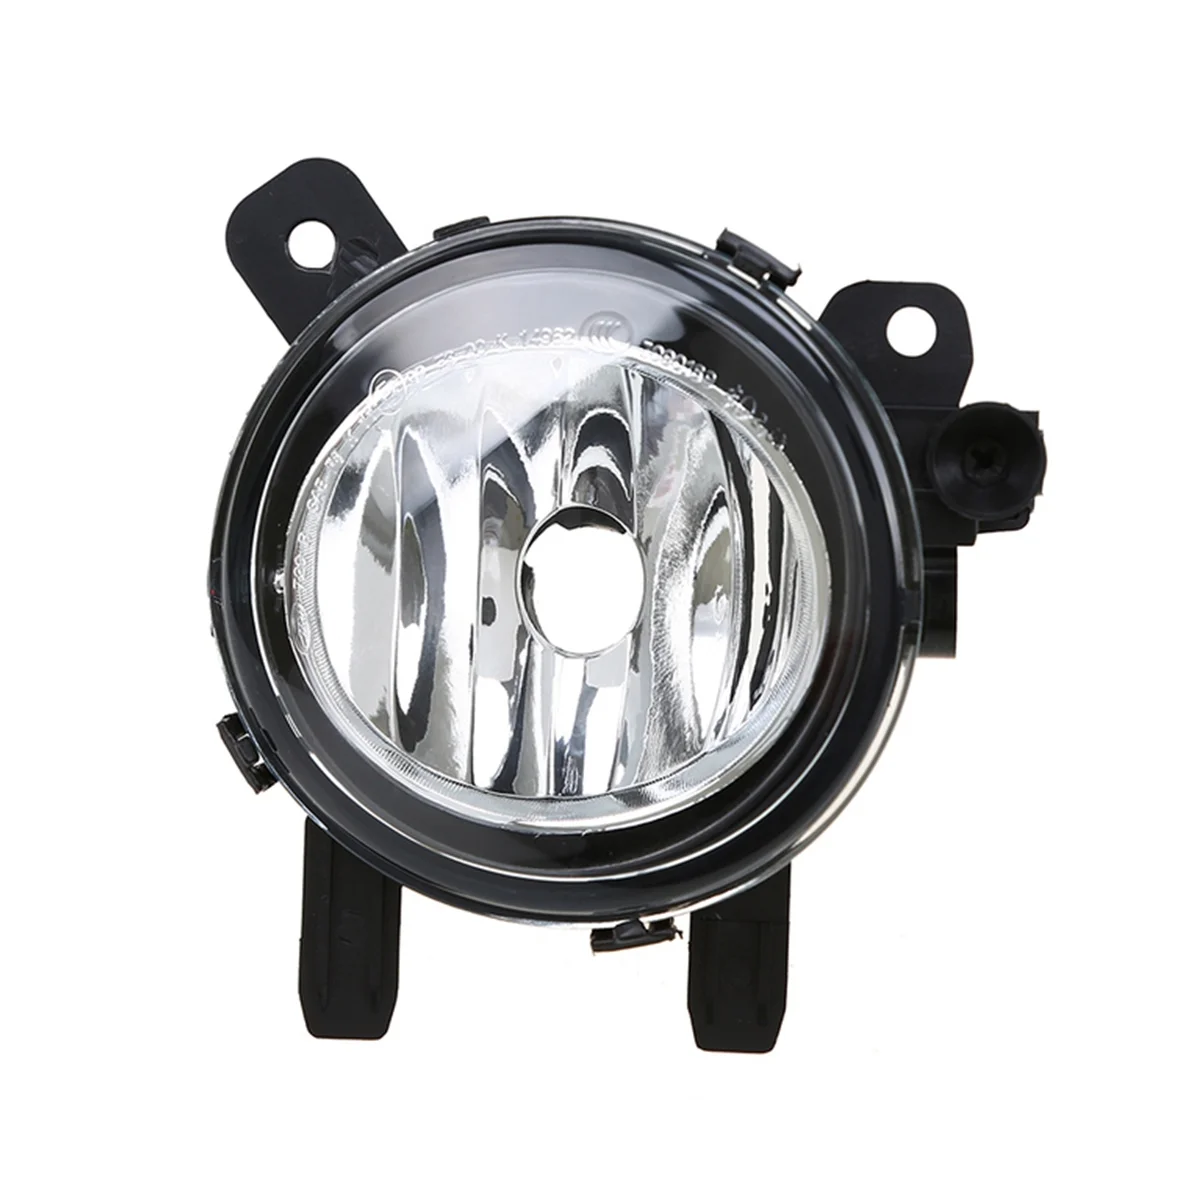 

63177248912 Car Front Right Bumper Fog Lights Driving Lamp Without Bulb for BMW 1 2 3 4 Series F22 F30 F35 2012-2015